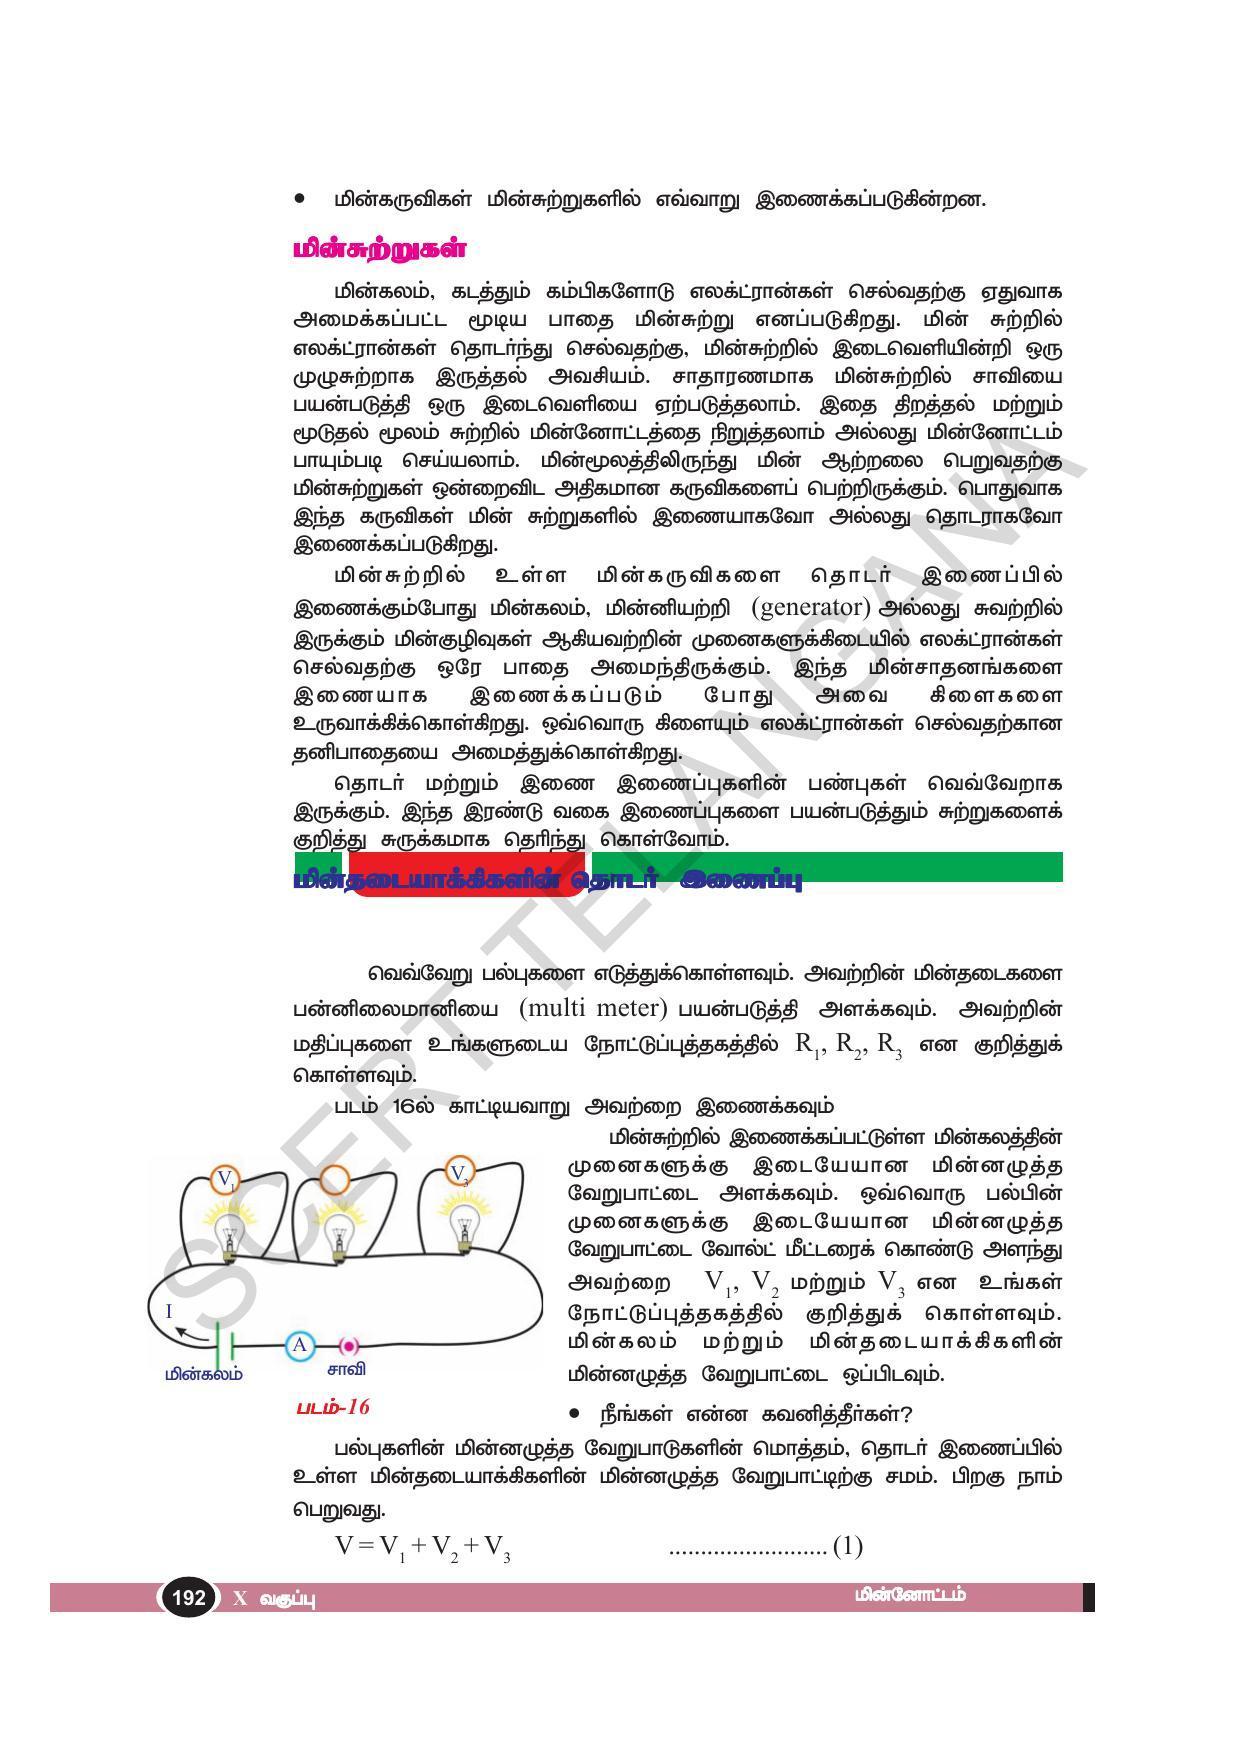 TS SCERT Class 10 Physical Science(Tamil Medium) Text Book - Page 204